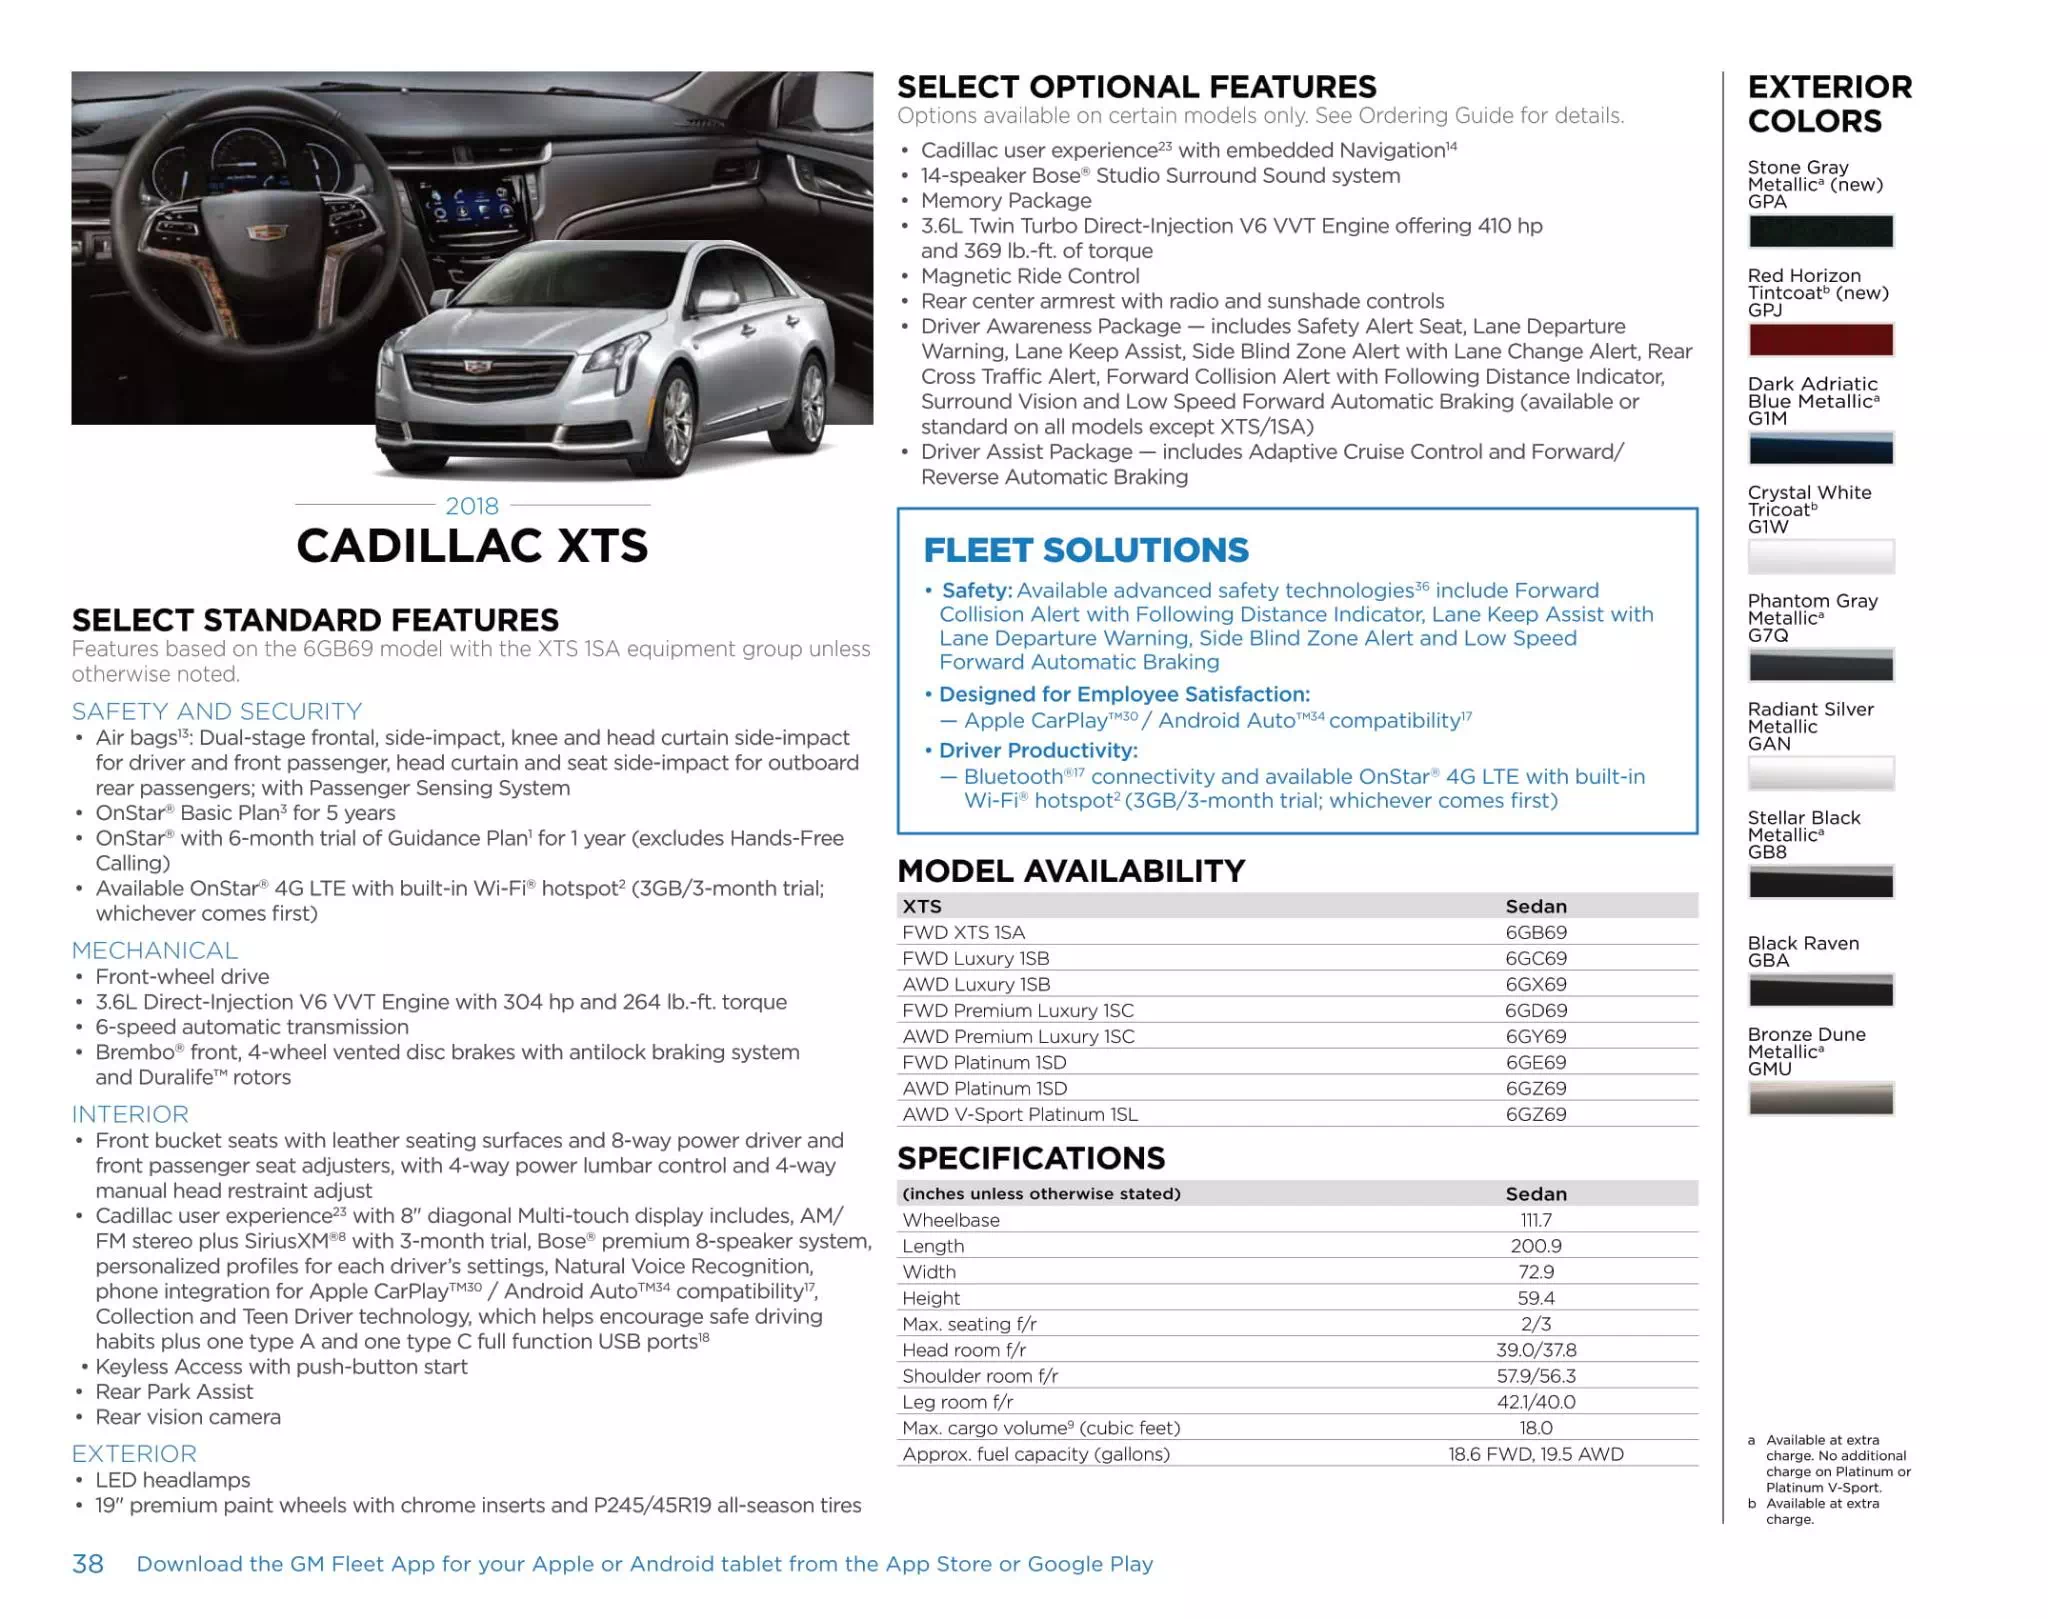 2018 GM Sell Sheet For xts Color Codes and Models